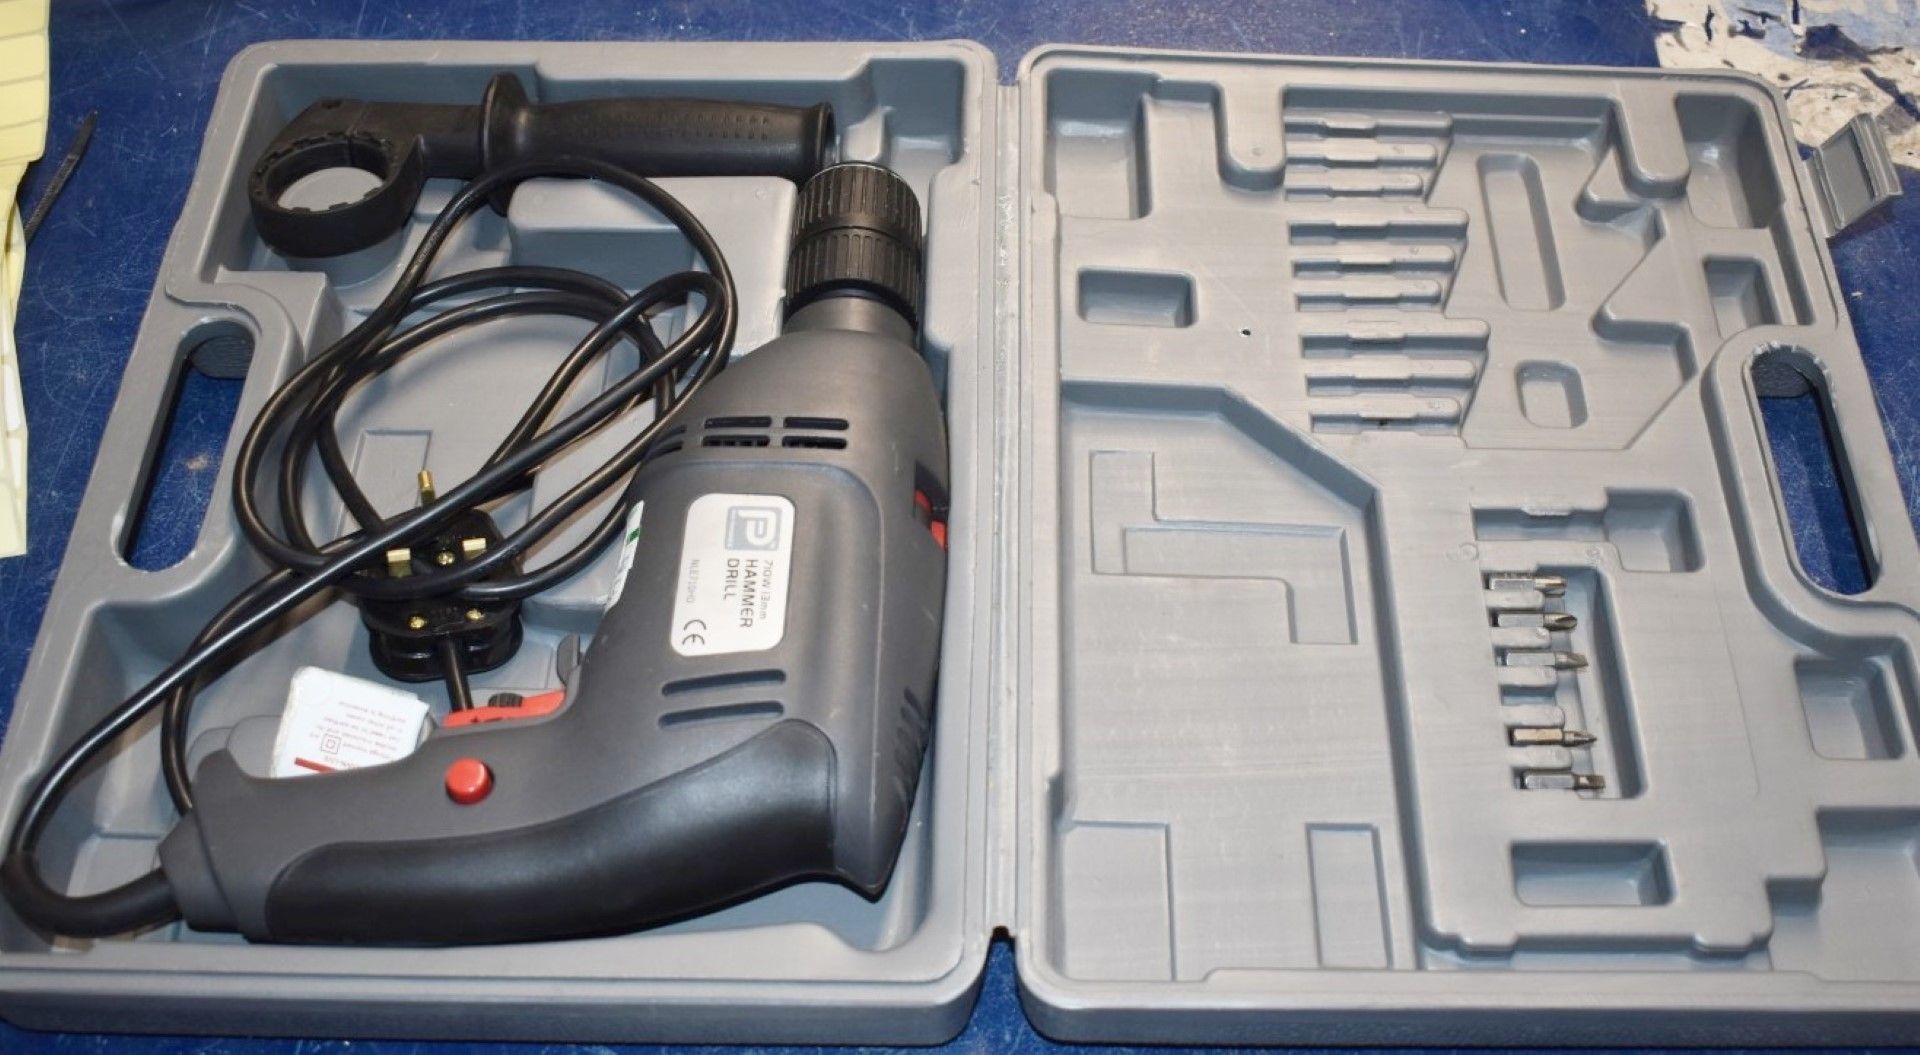 1 x Performance Pro 710w 13mm Corded Hammer Drill With Carry Case Model Number NLE710HD - Image 3 of 6